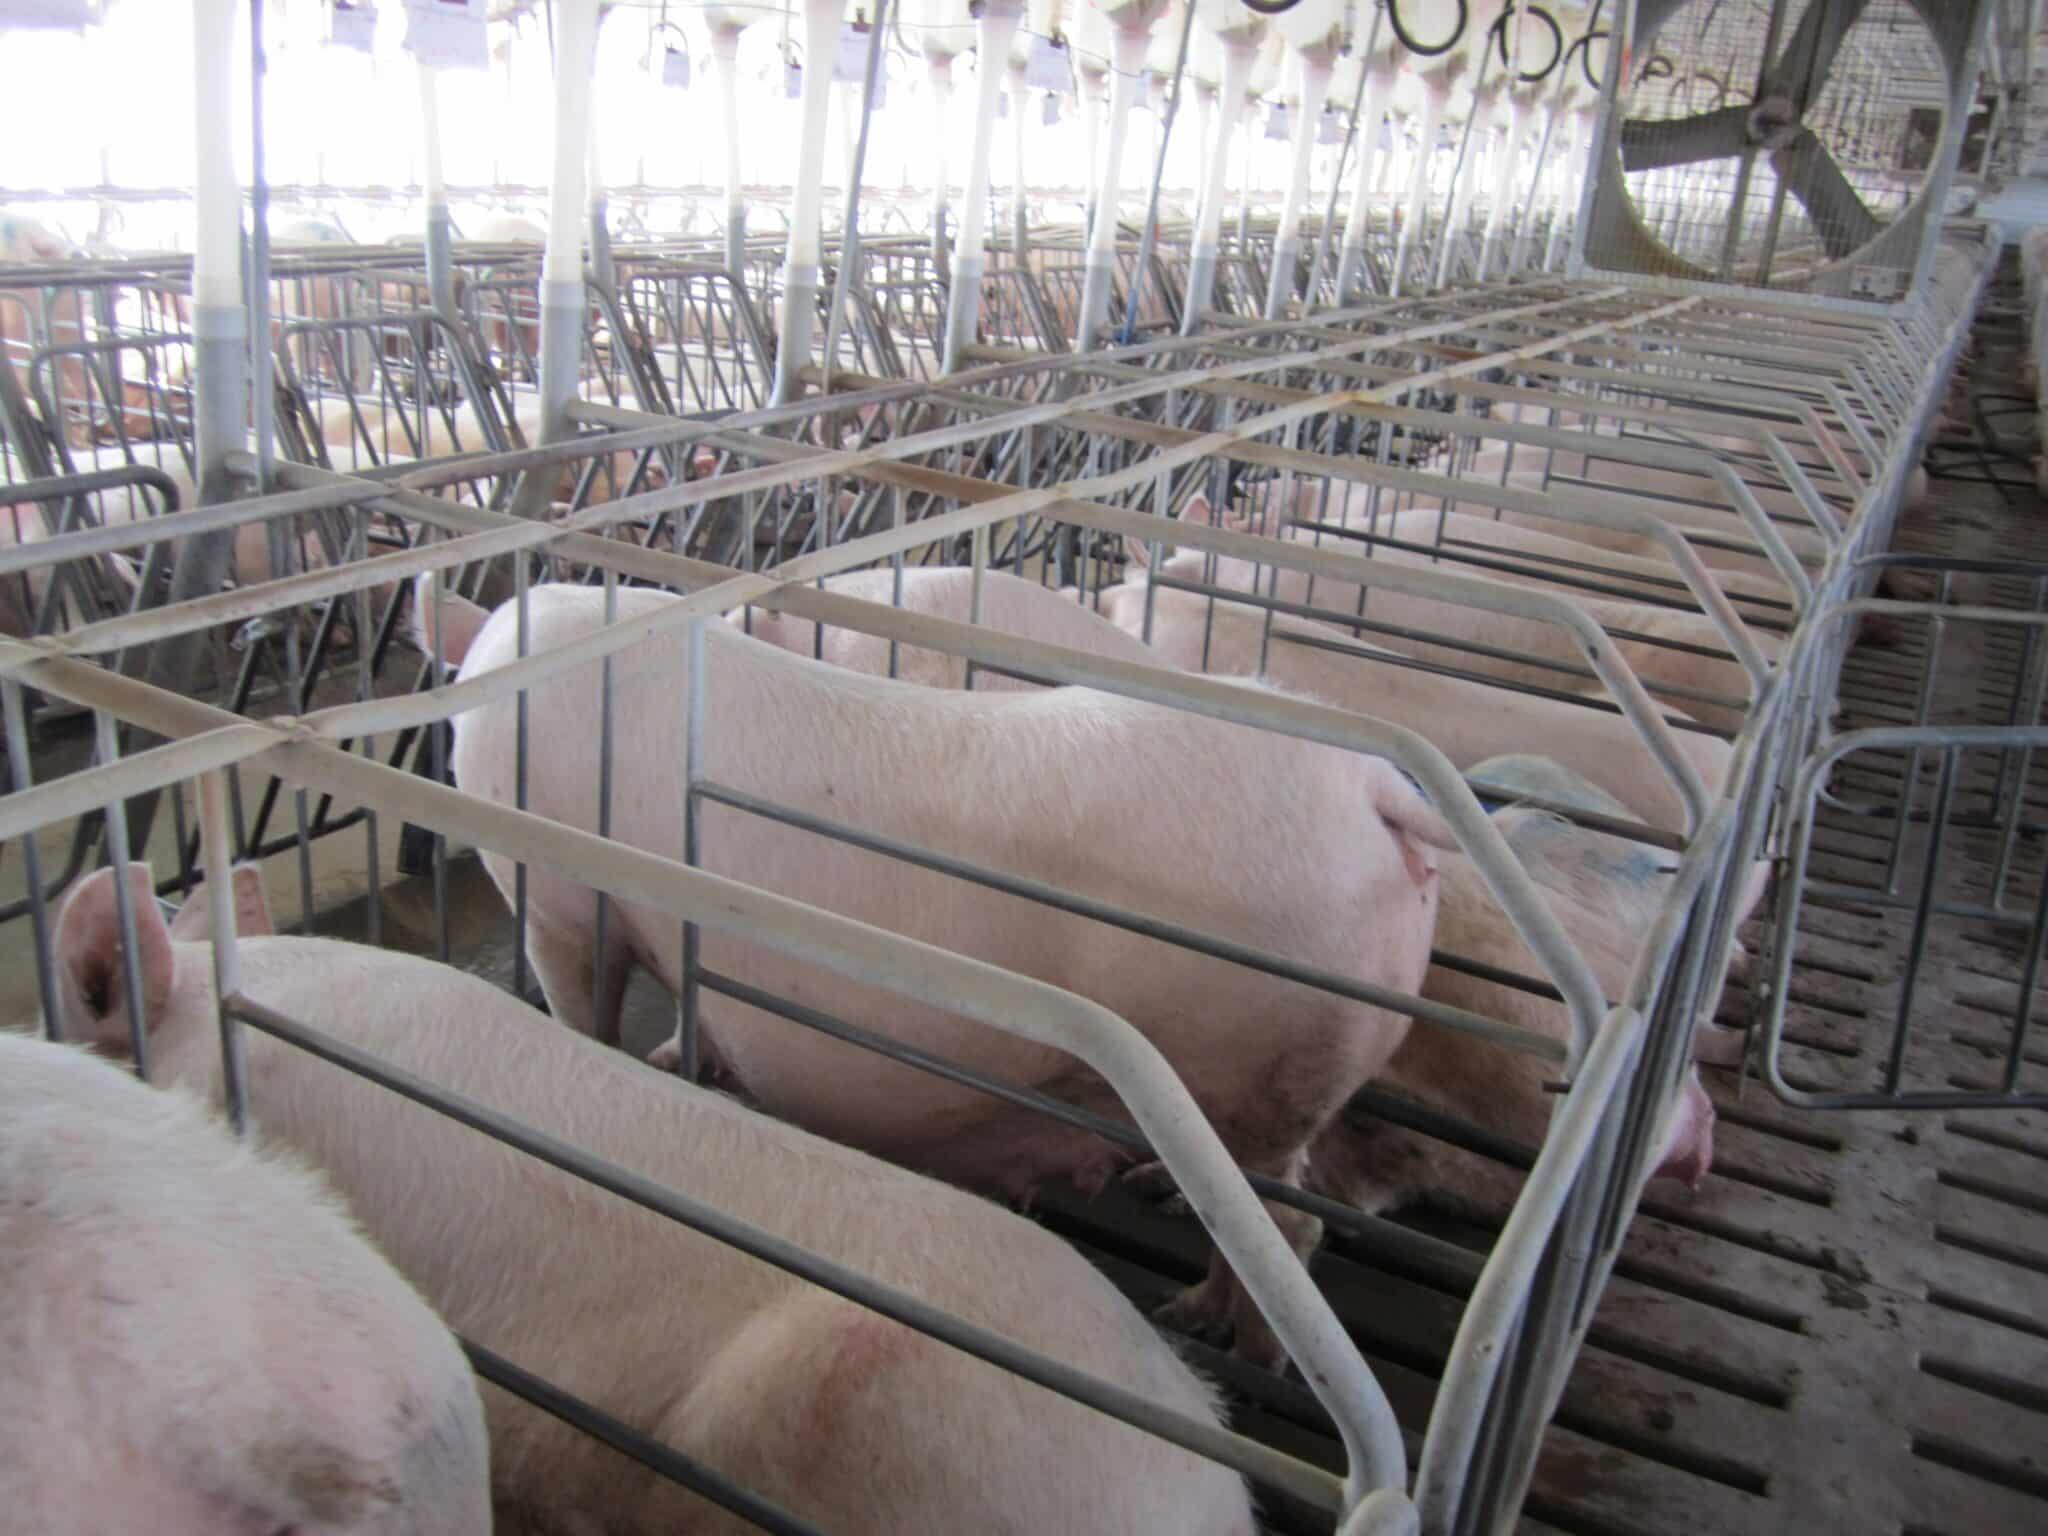 Sows in gestation crates at a breeding facility in Waverly, Virginia